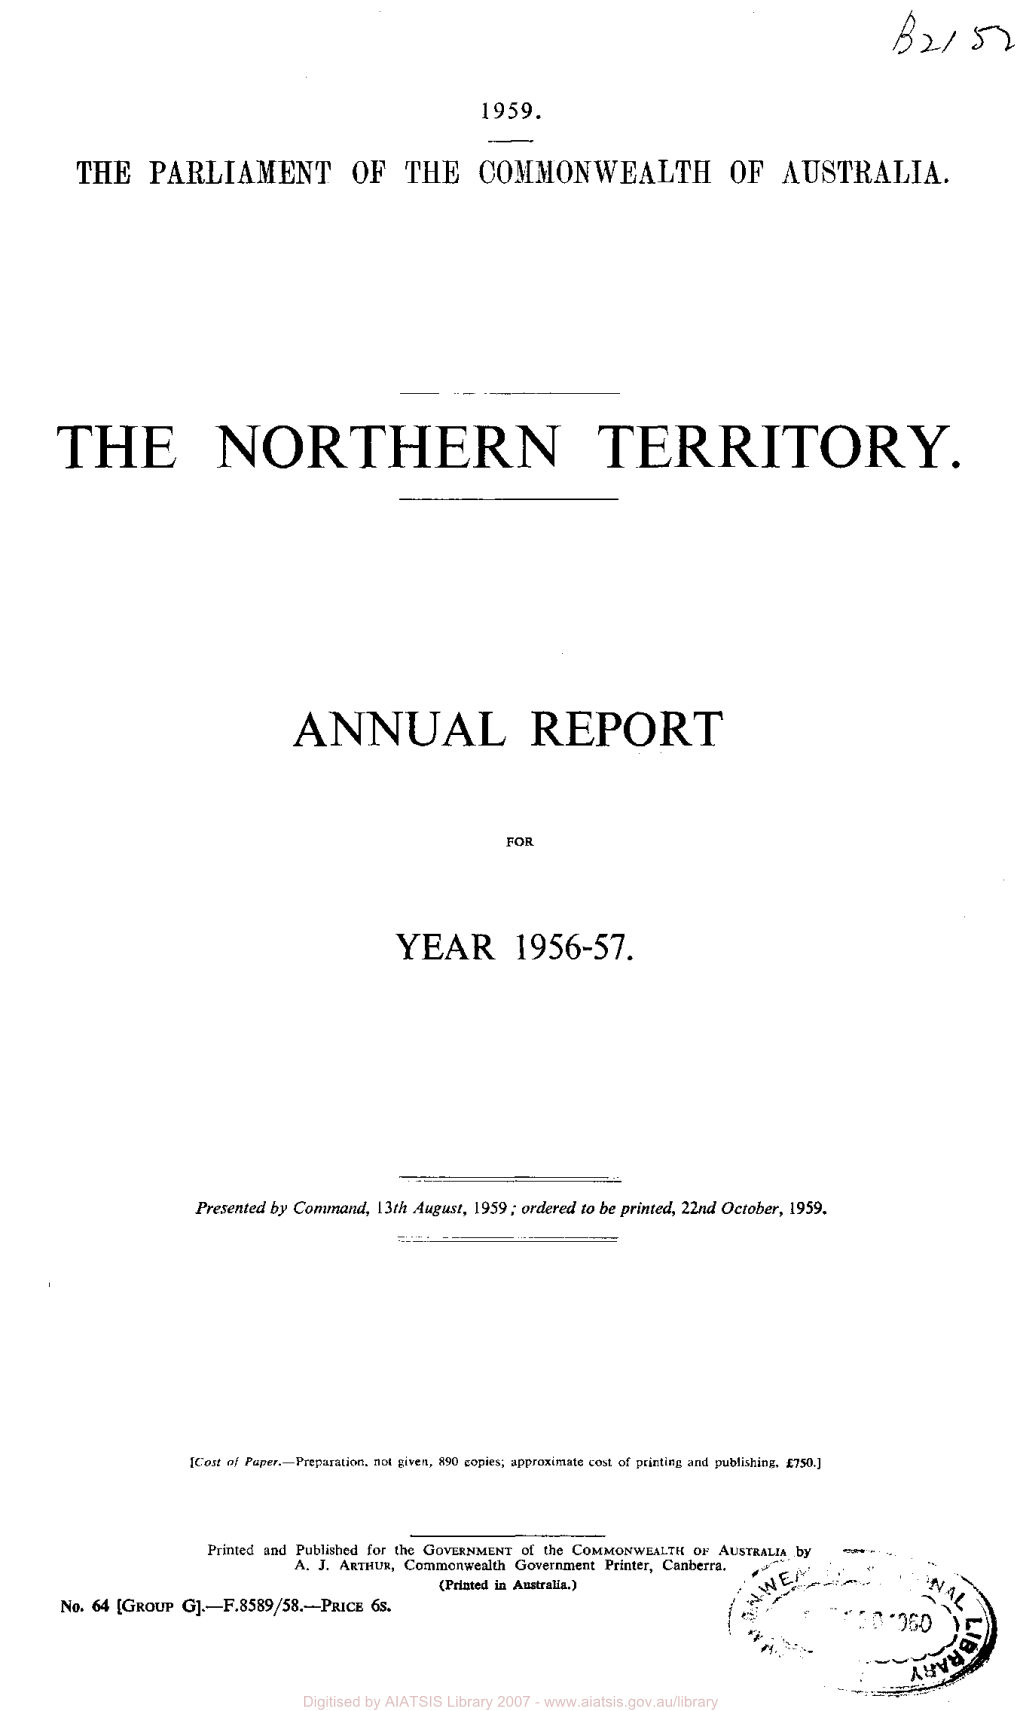 Northern Territory Annual Report for Year 1956-57